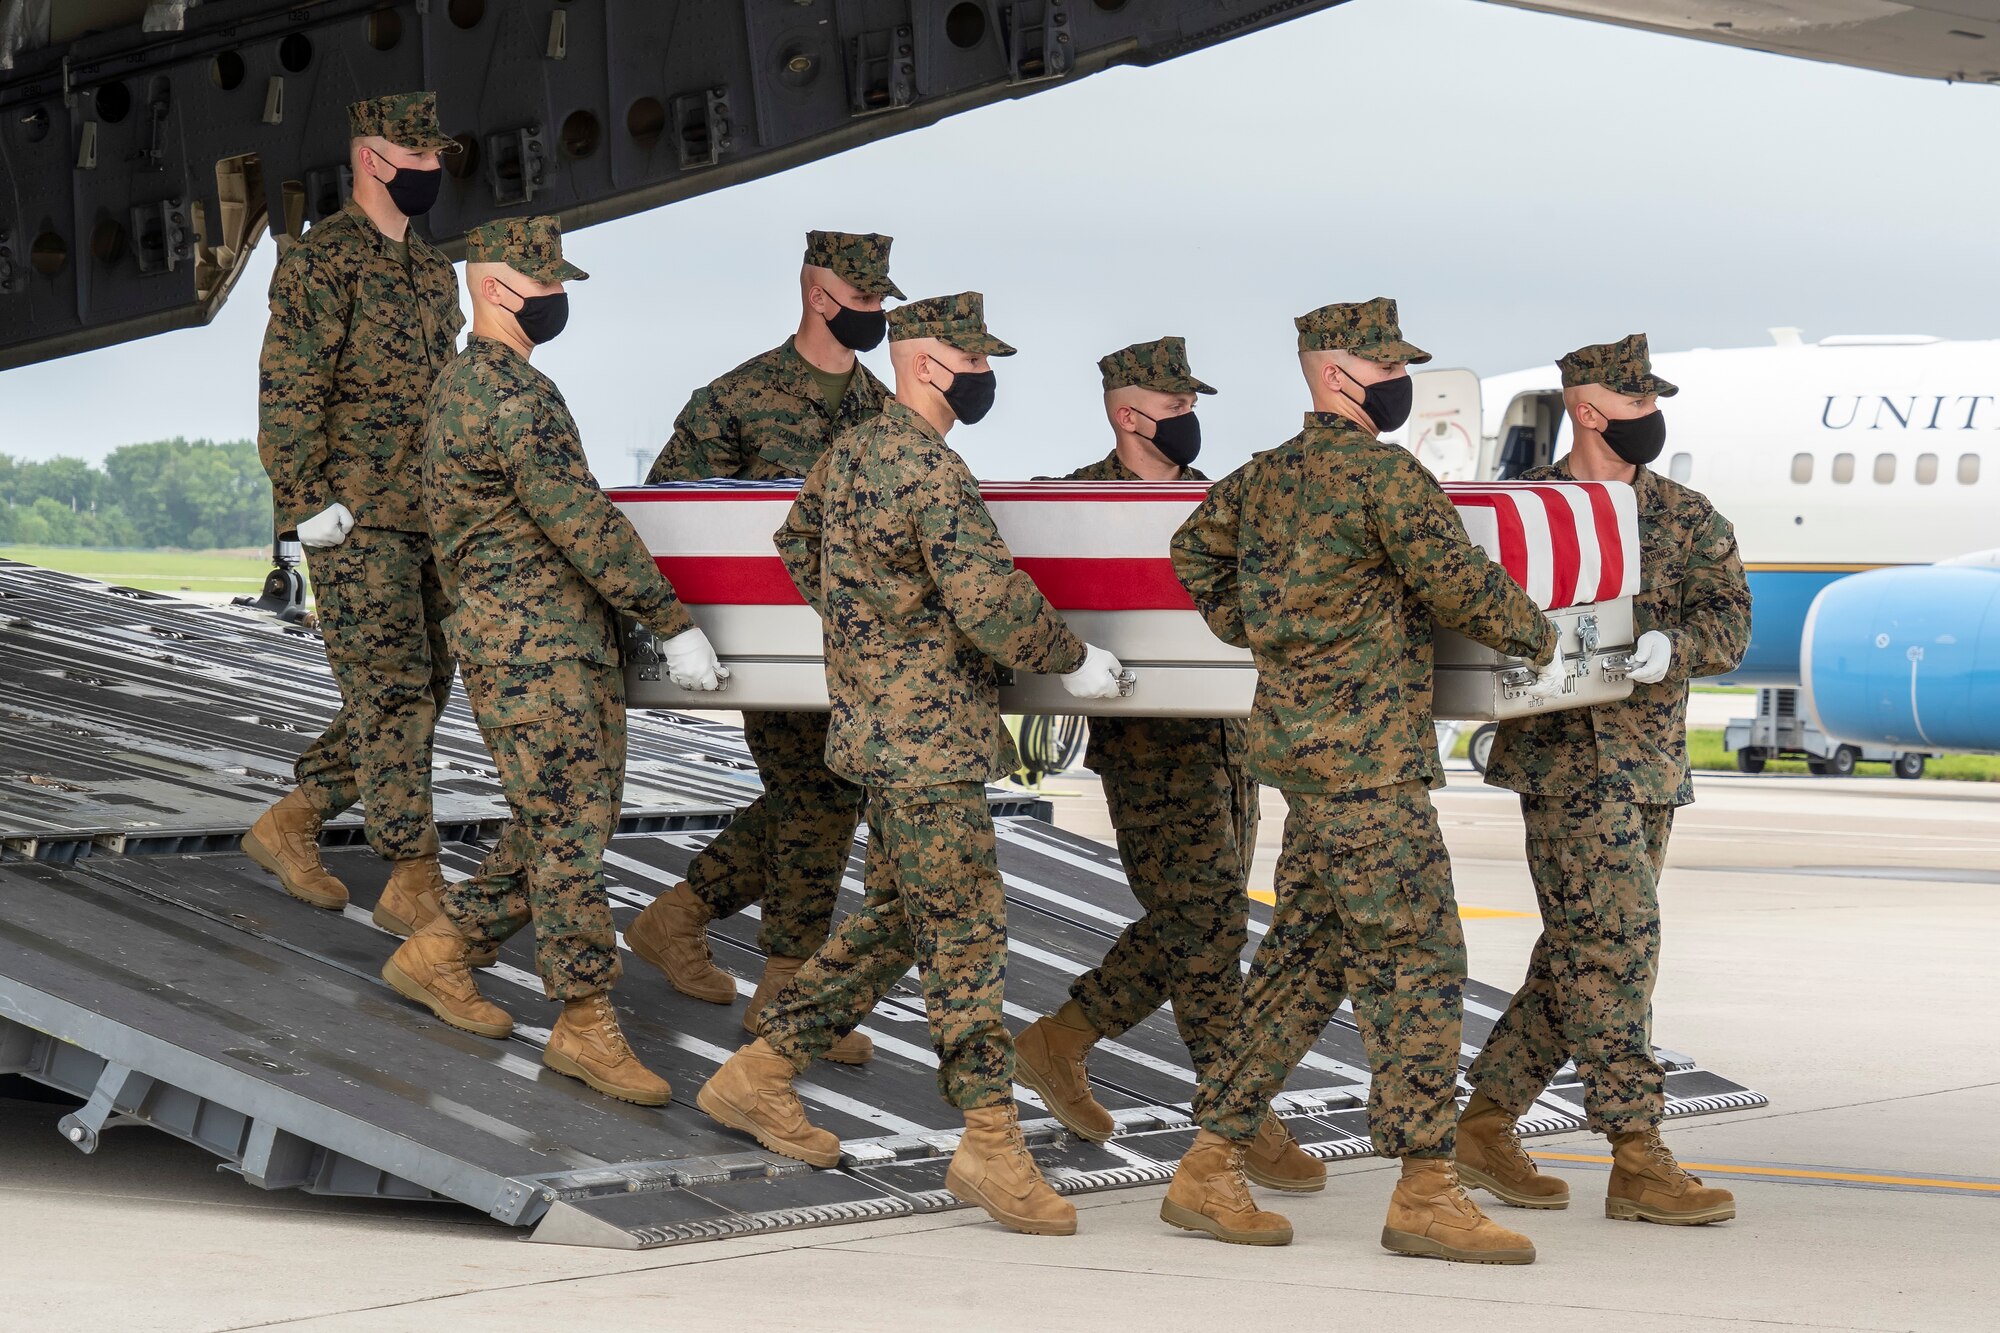 A U.S. Marine Corps carry team transfers the remains of Marine Corps Sgt. Johanny Rosariopichardo of Lawrence, Massachusetts, August 29, 2021 at Dover Air Force Base, Delaware. Rosariopichardo was assigned to 5th Marine Expeditionary Brigade, Naval Support Activity Bahrain. (U.S. Air Force photo by Jason Minto)